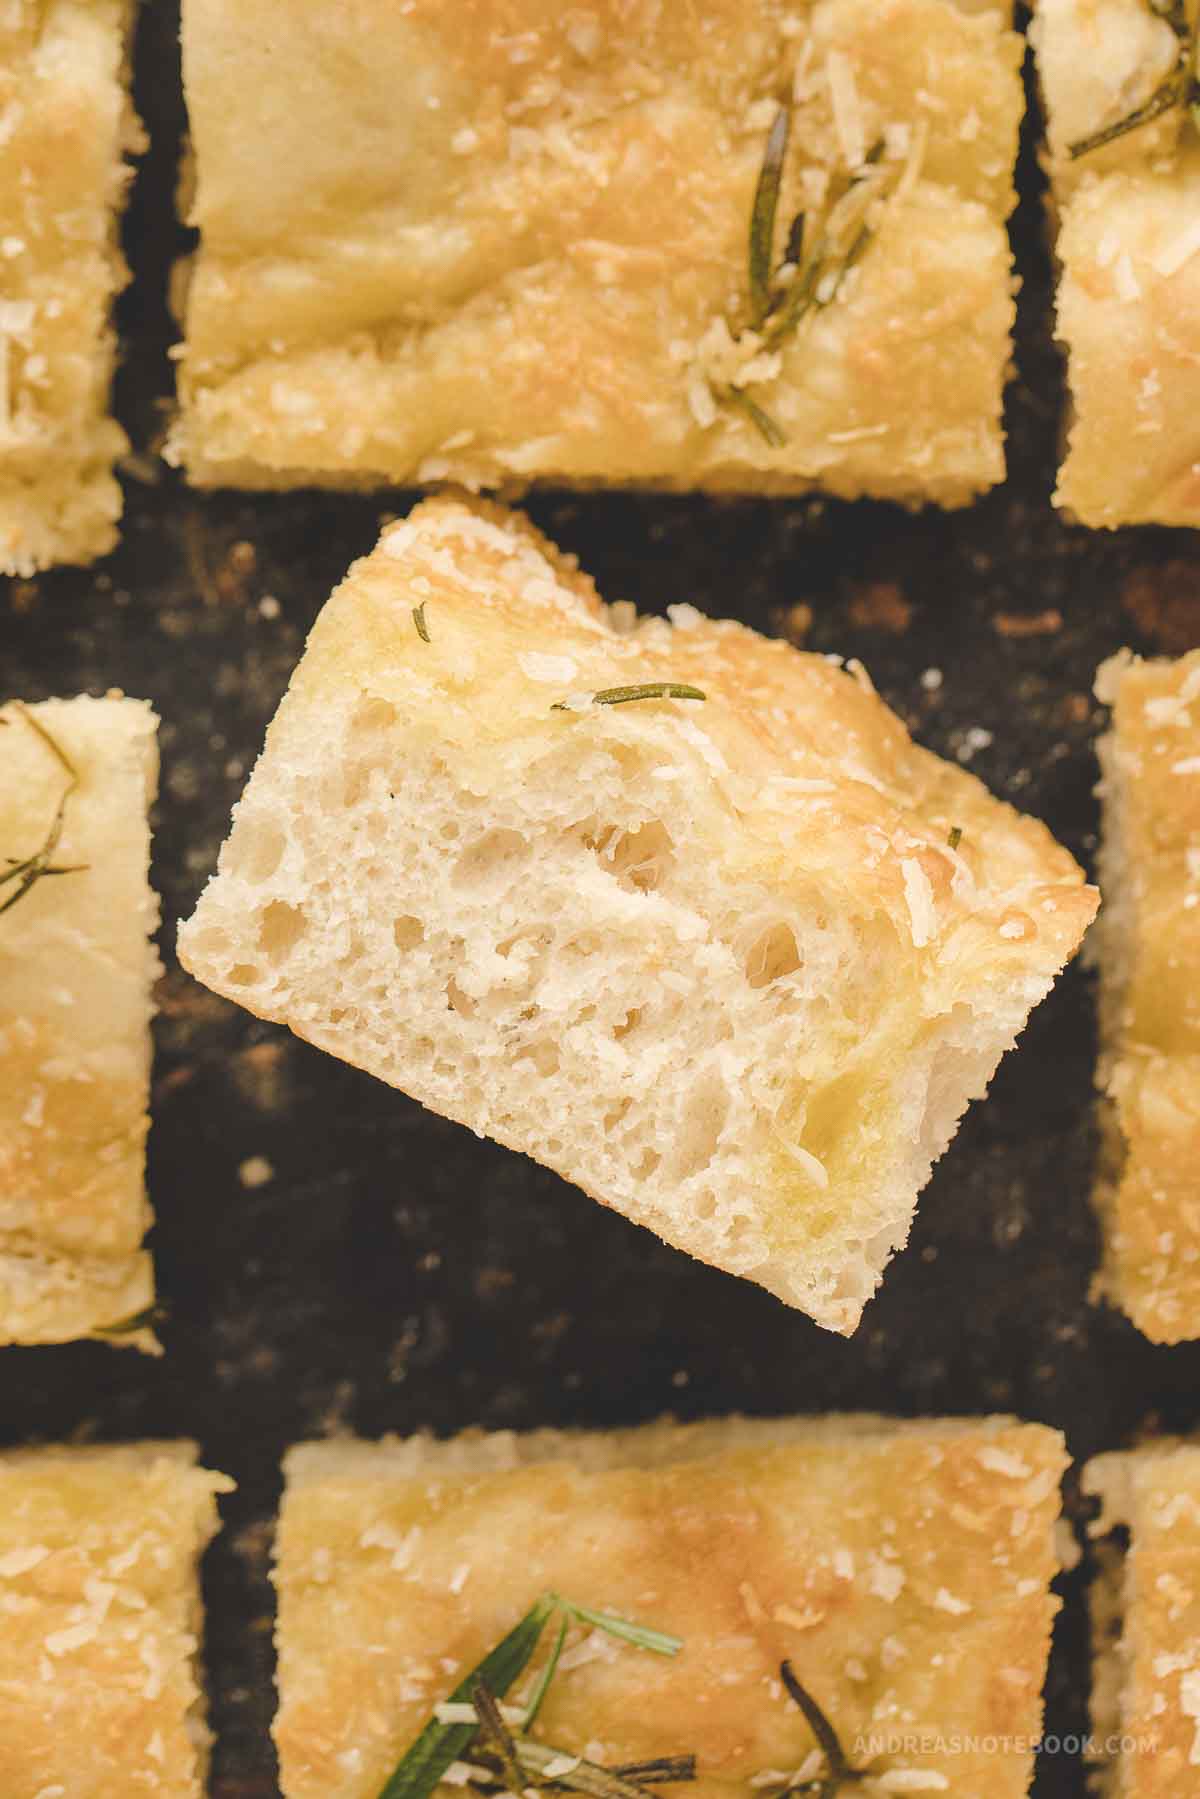 Square of garlic herb focaccia bread on it's side showing light fluffiness.